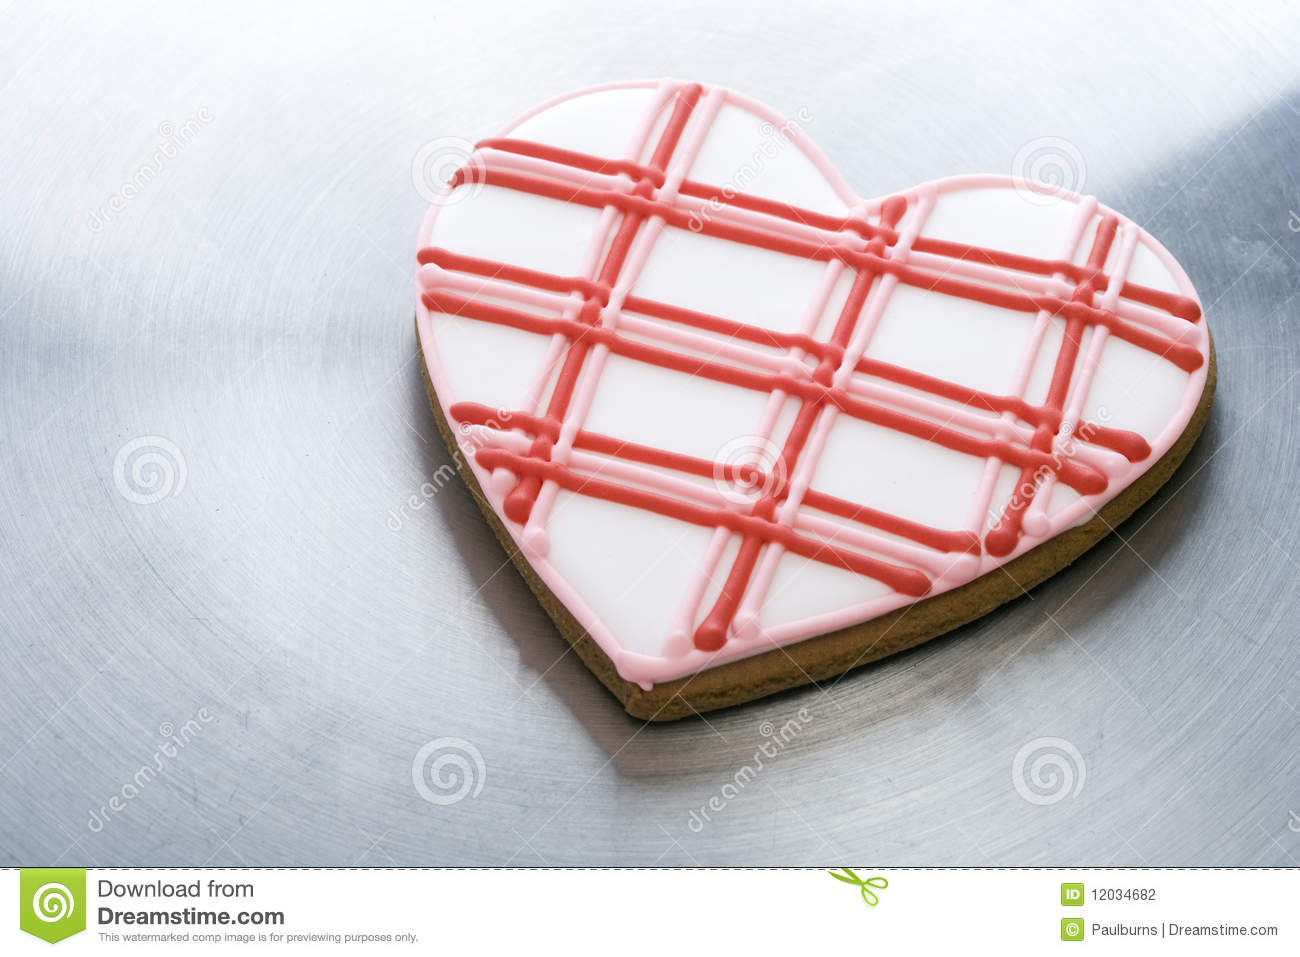 Heart Shaped Decorated Cookie Is Sitting On A Silver Surface